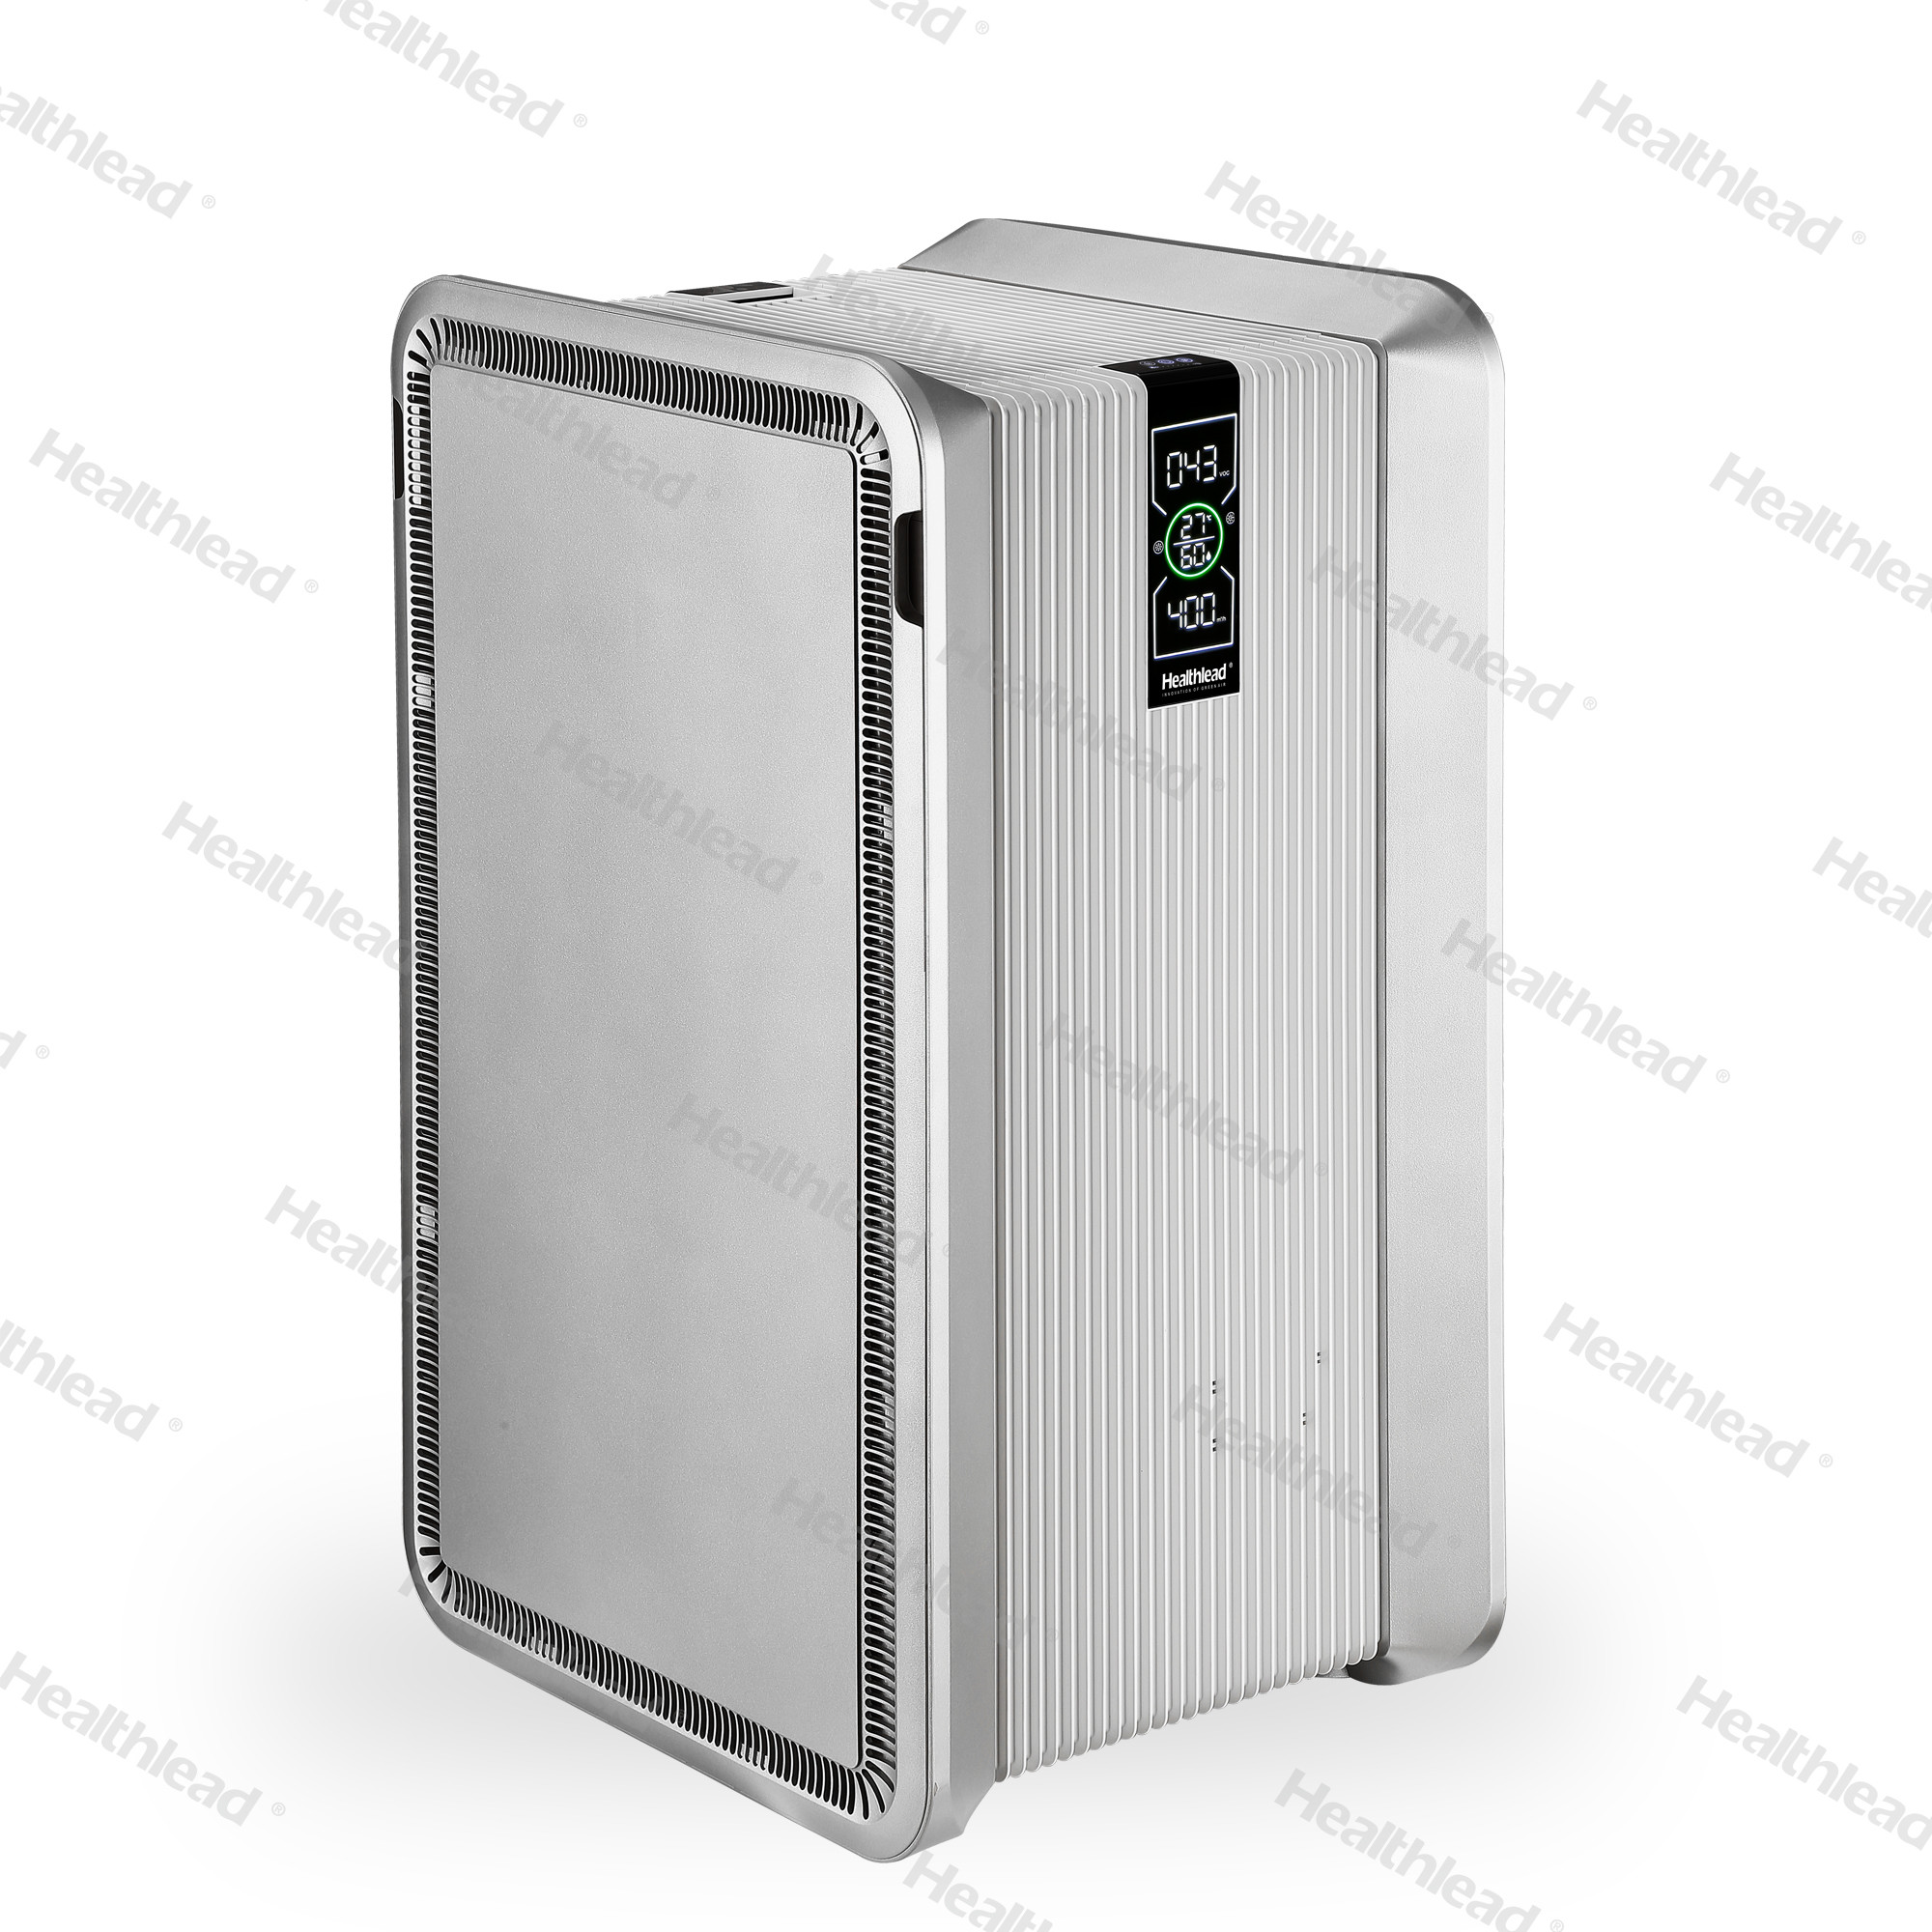 China Hospital Large Places Healthlead Air Purifier 0-500ug/M3 PM2.5 Value Display fresh air machine for sale